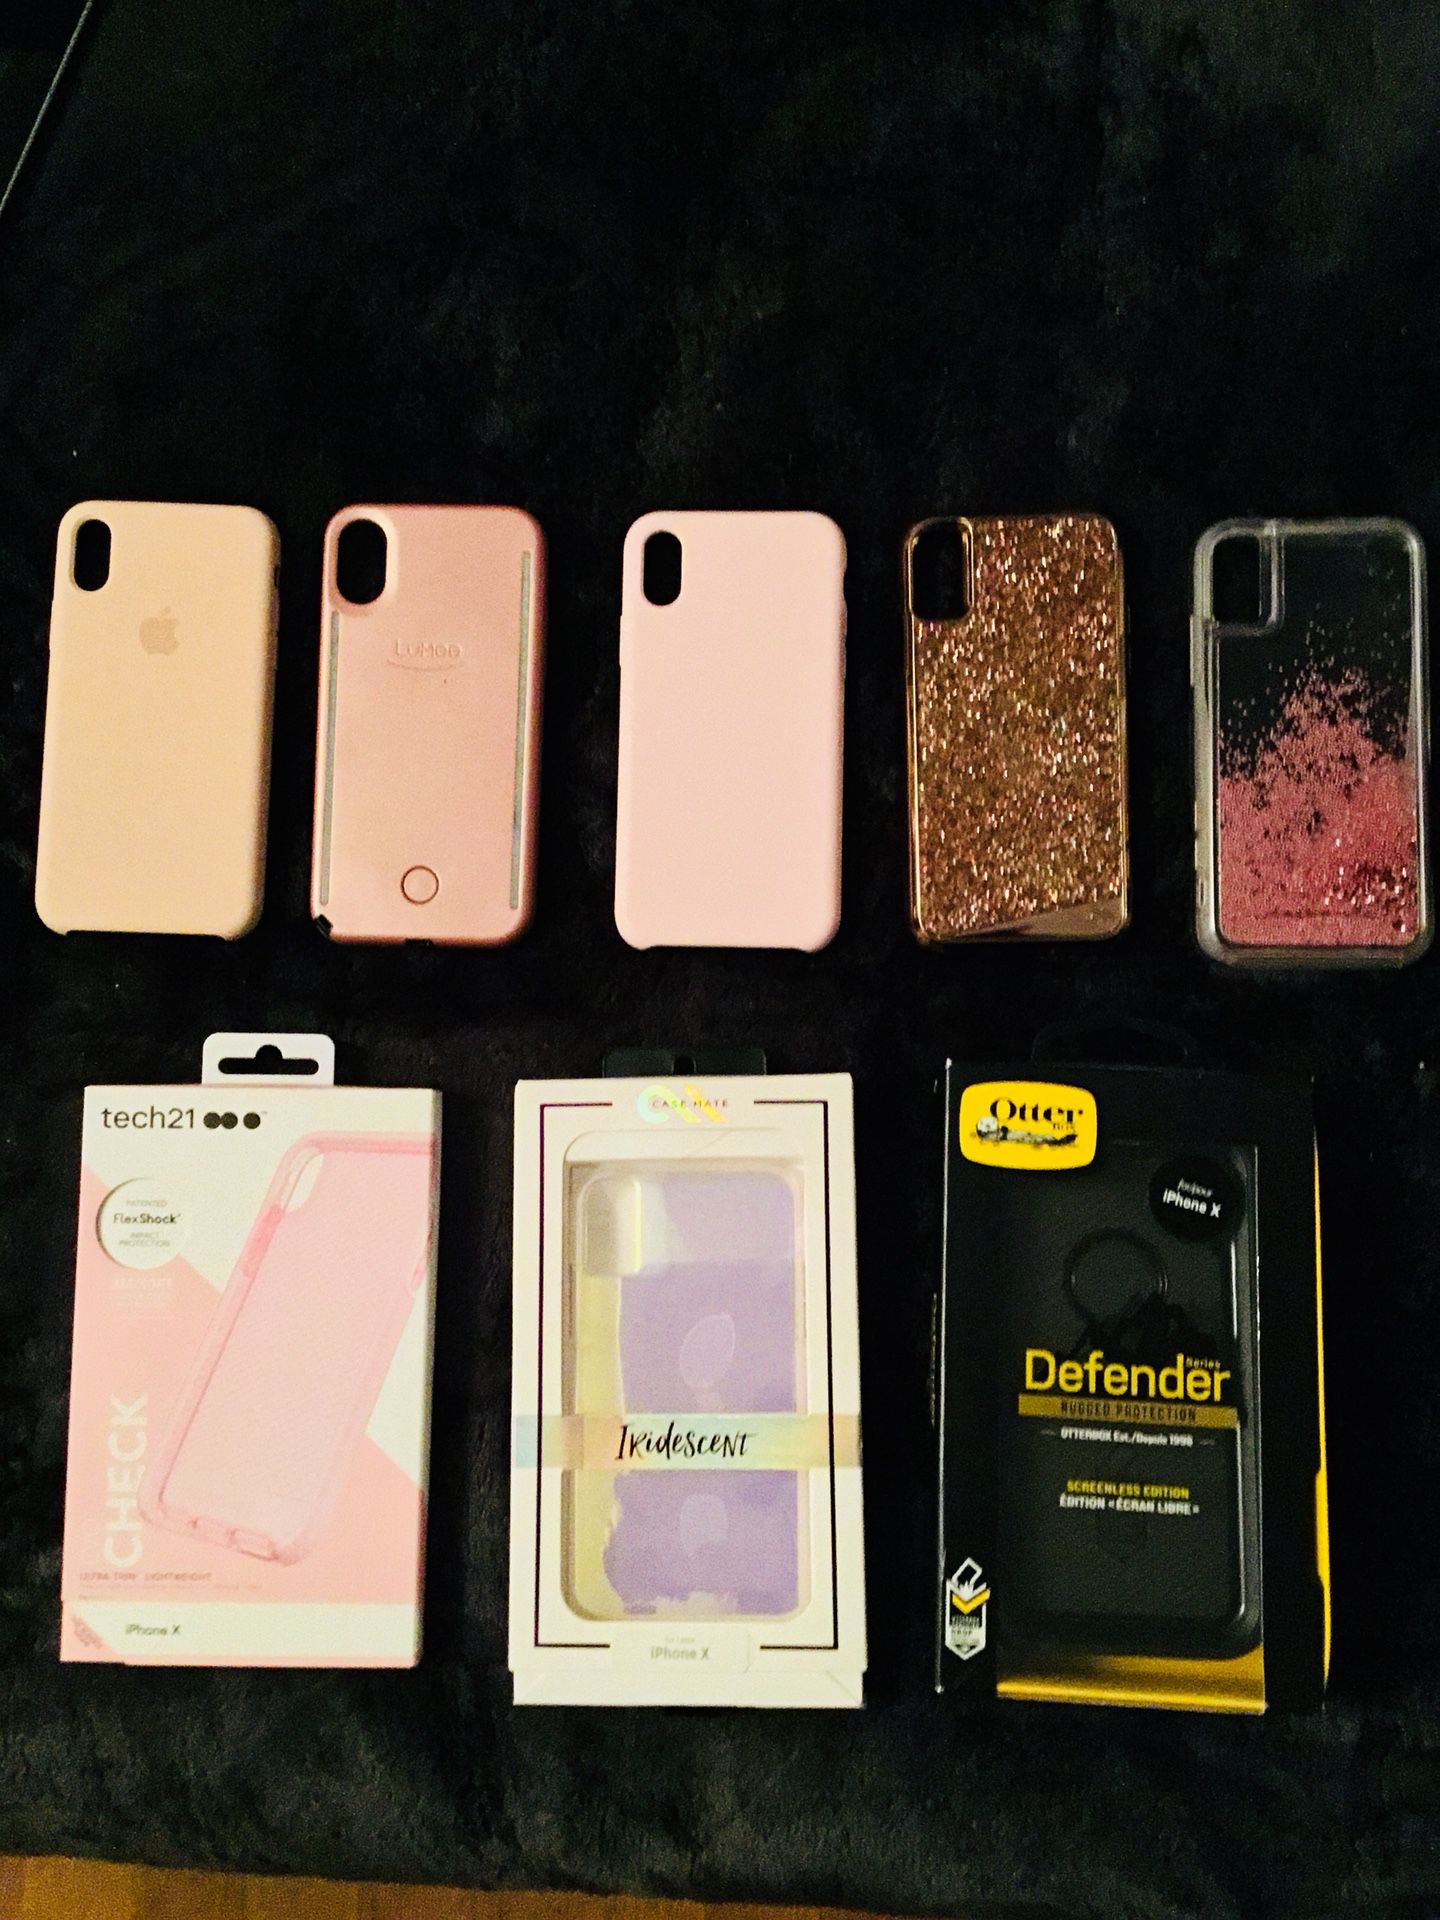 *****BRAND NEW IPHONE X CASES, $100 FOR ALL TODAY!**